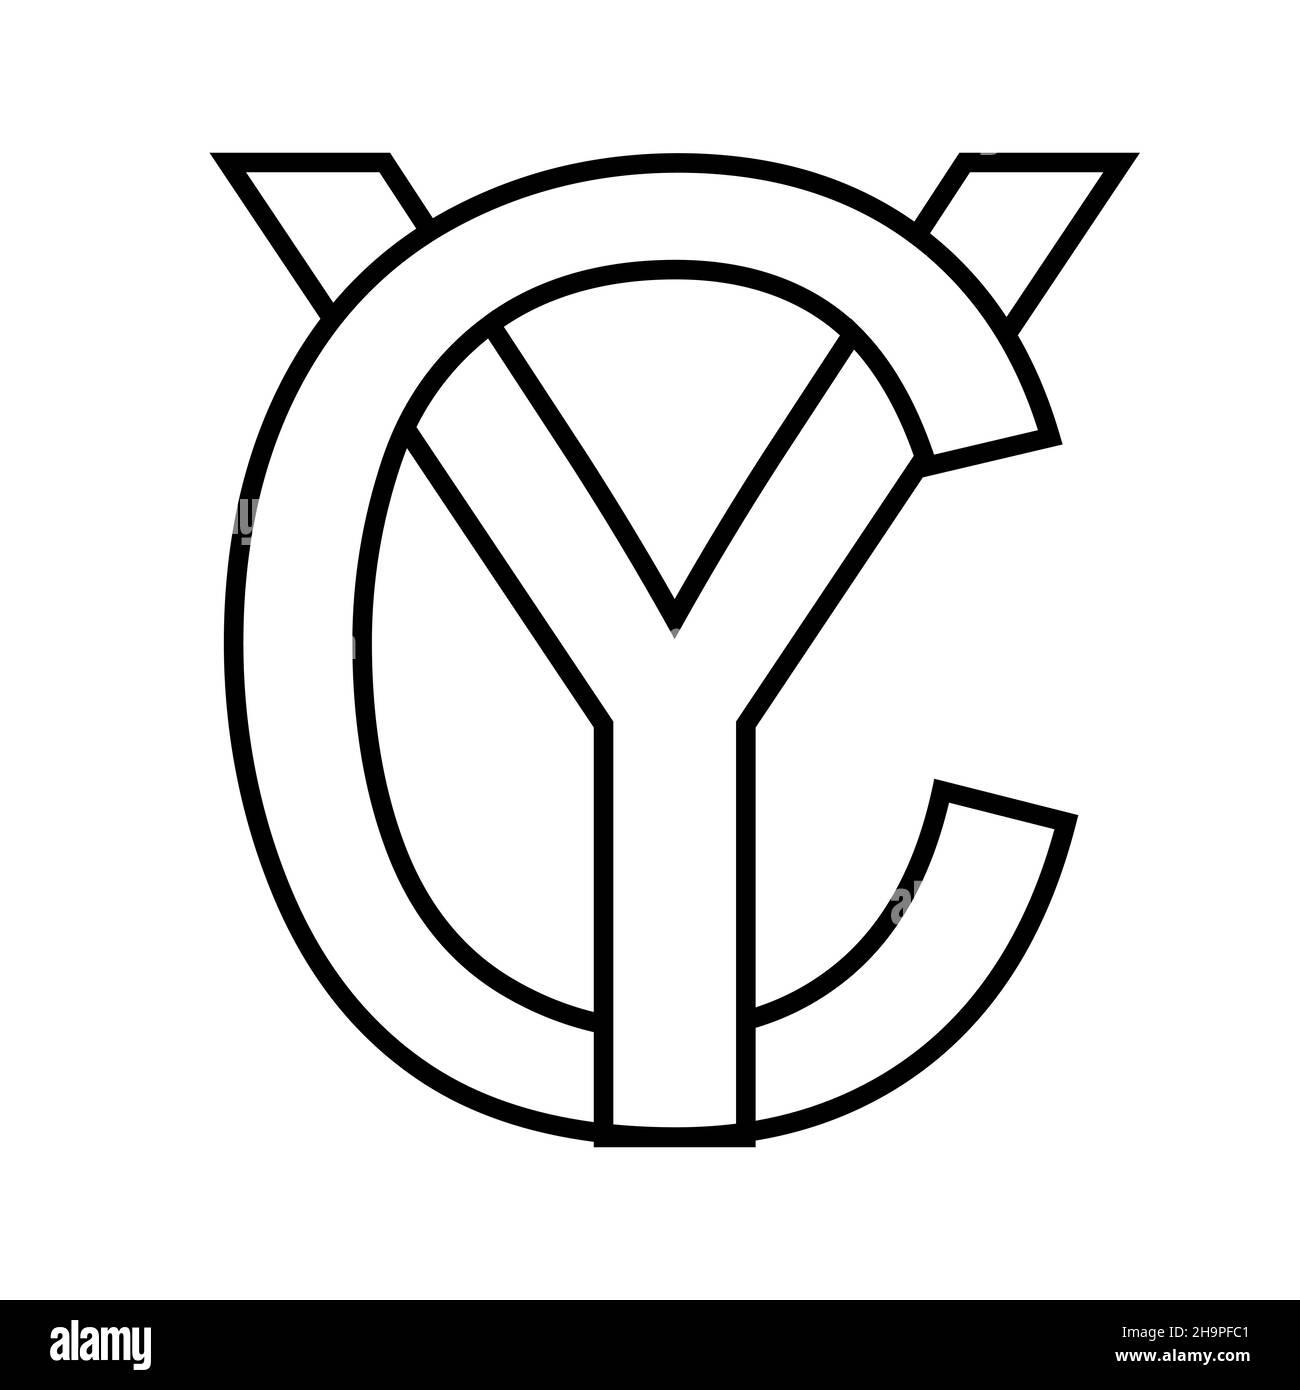 Logo sign yc cy icon sign interlaced letters c y Stock Vector